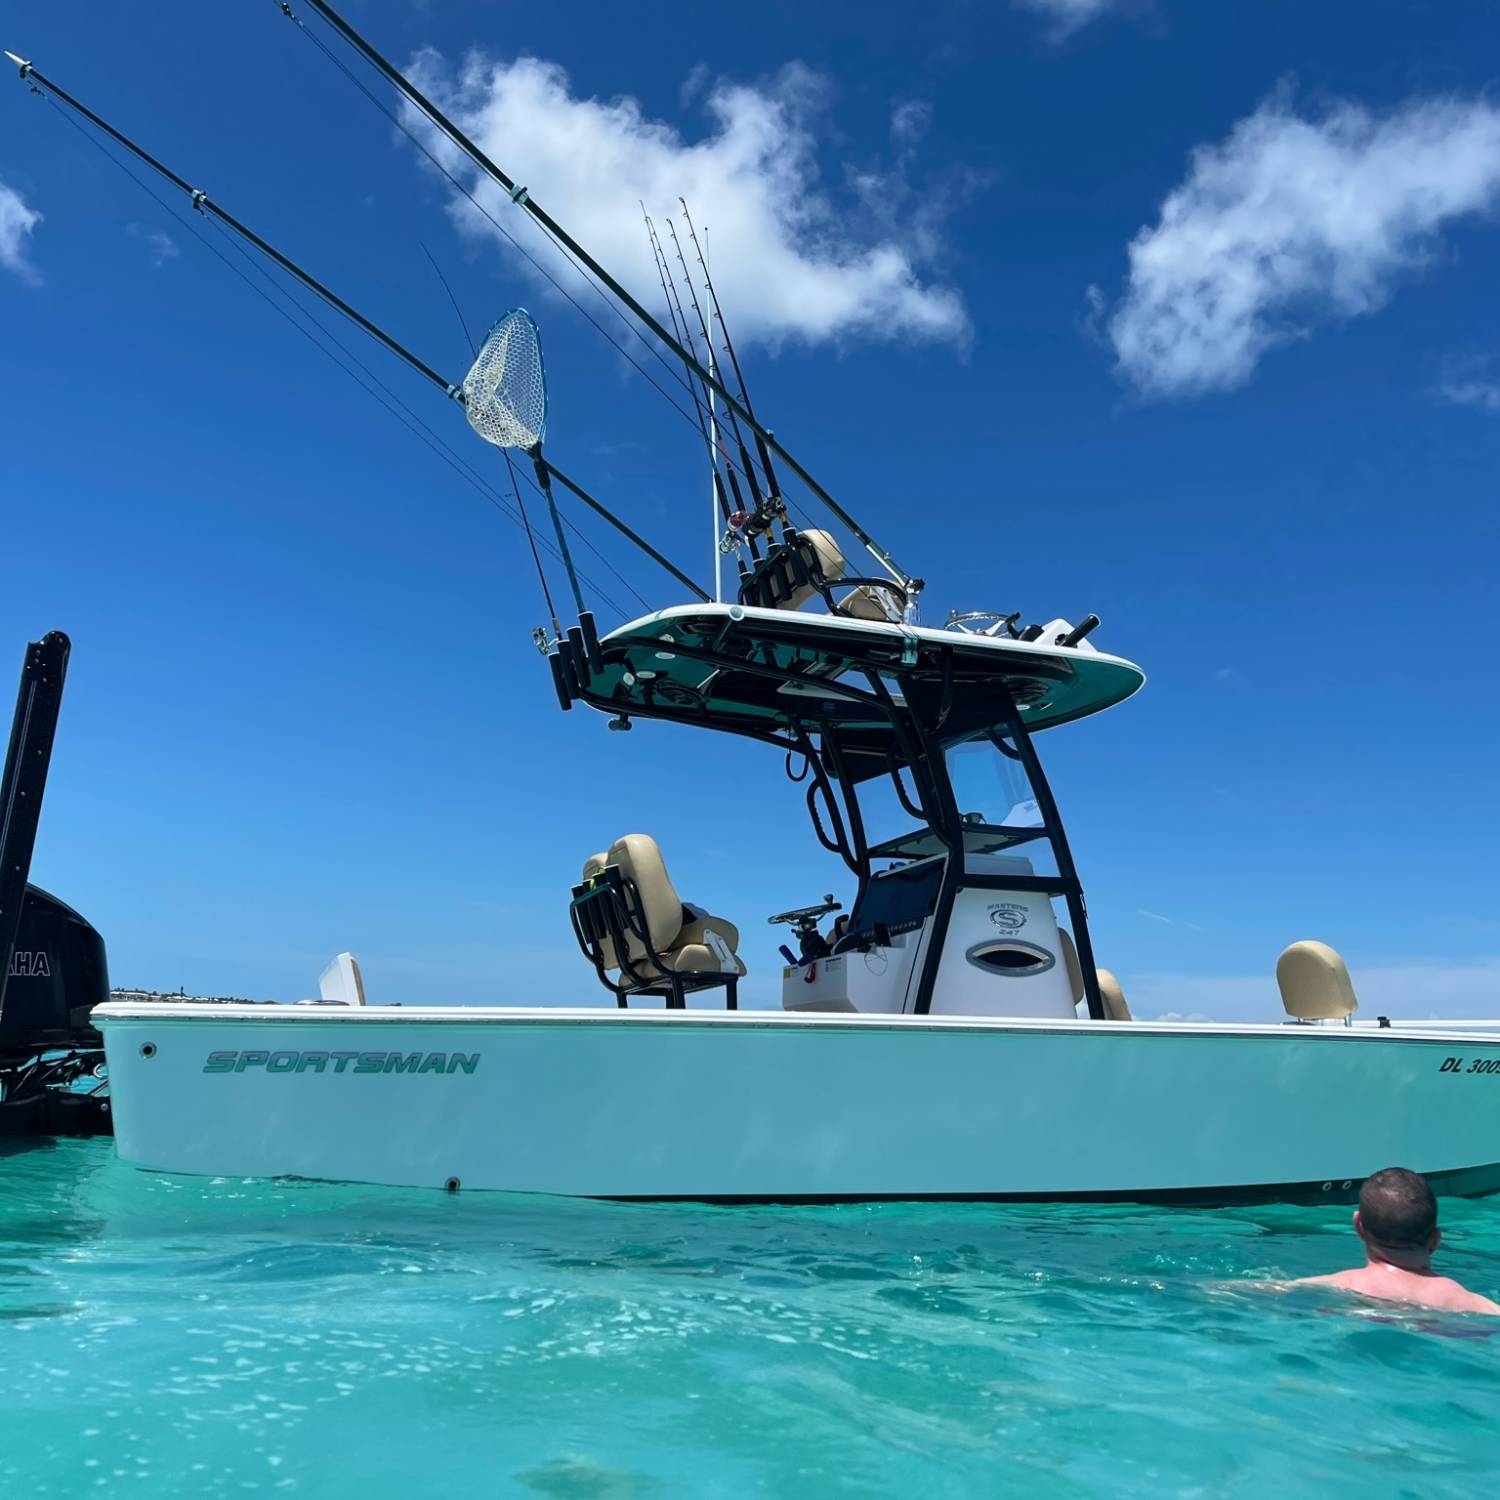 Title: Clear water - On board their Sportsman Masters 247 Bay Boat - Location: Marathon, Florida. Participating in the Photo Contest #SportsmanAugust